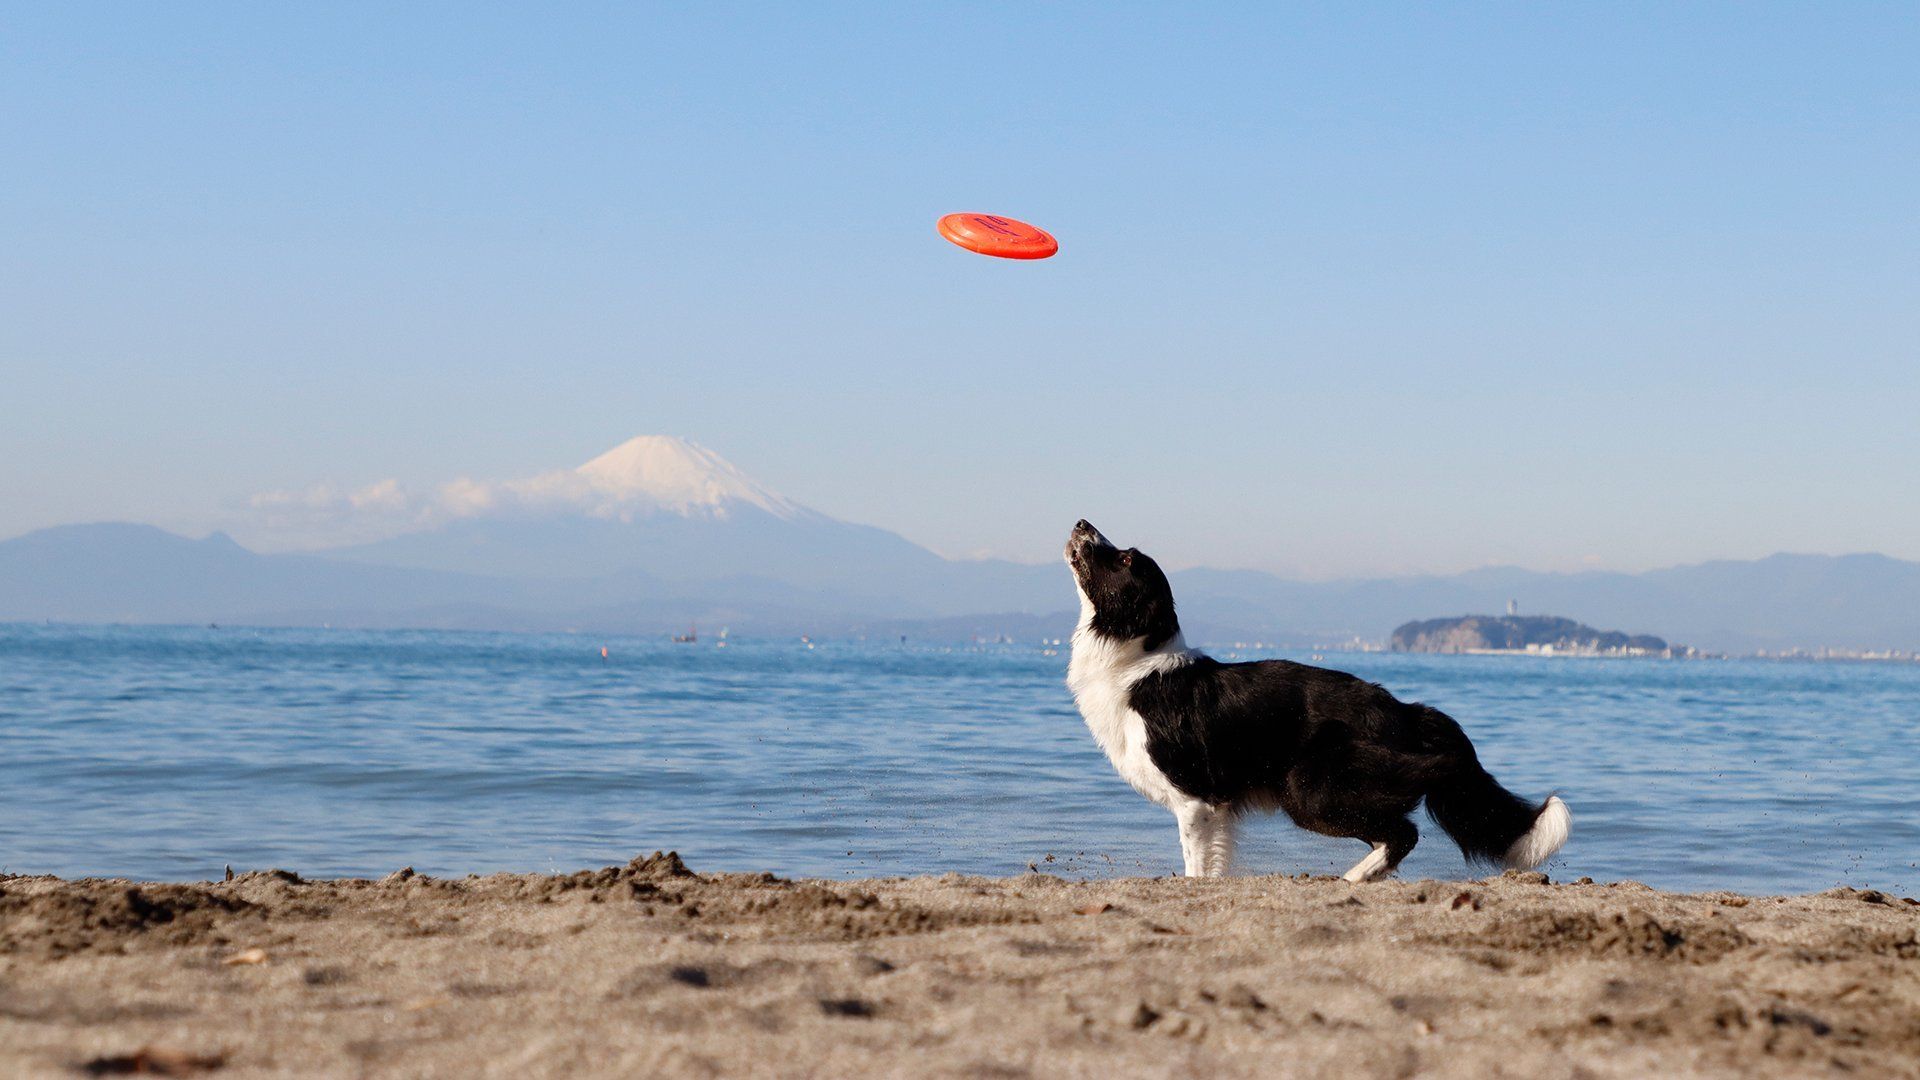 Dog about to jump for an orange Frisbee